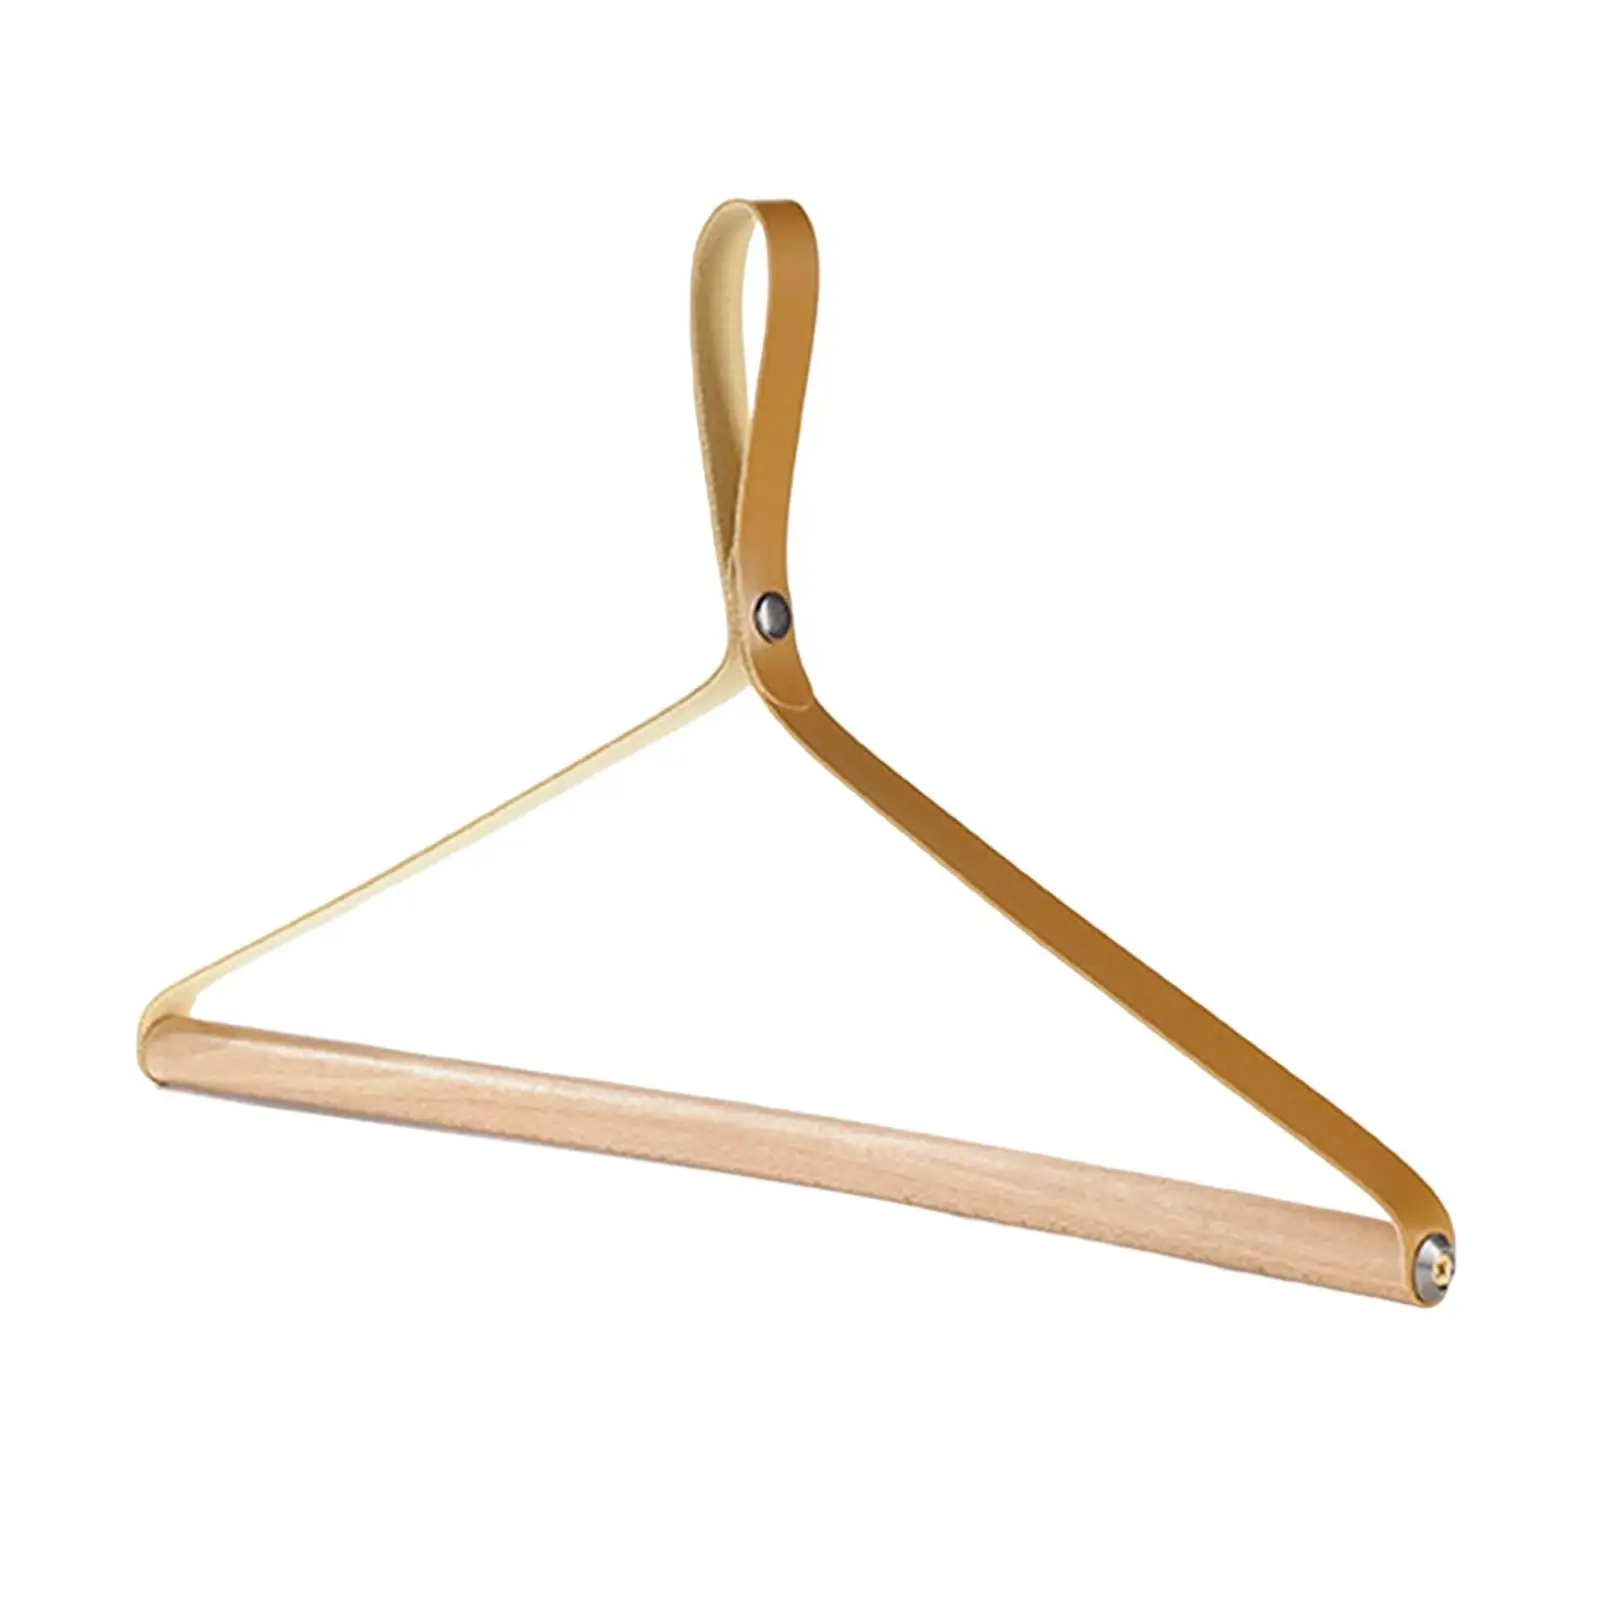 Wooden Folding Hanger Clothing Drying Rack Foldable for Camping Laundry Tent